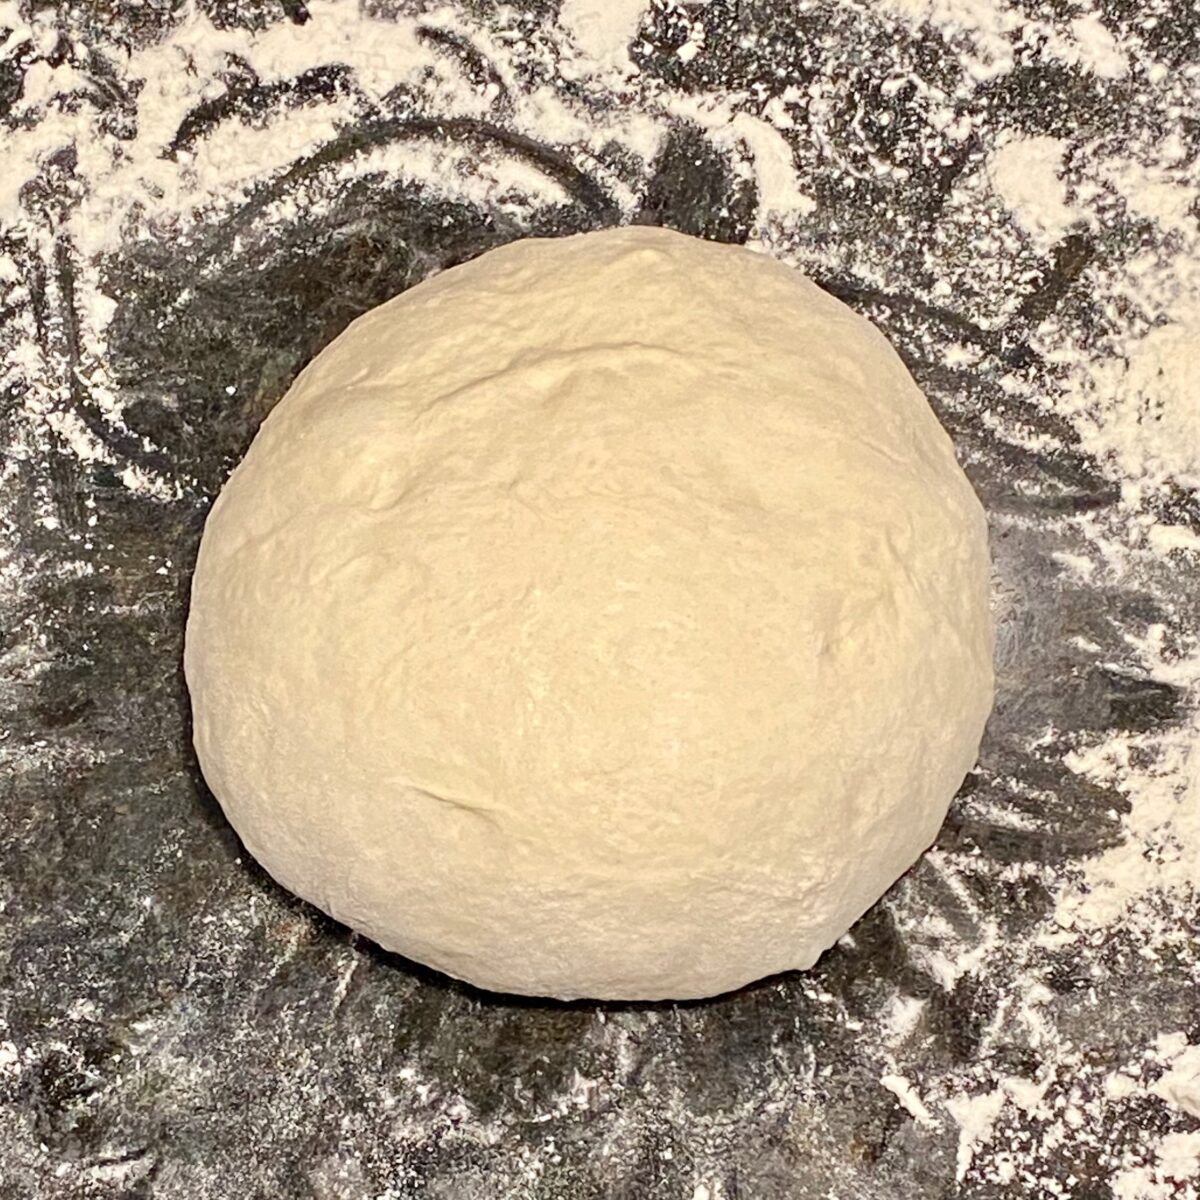 The dough ball after shaping and tucking. The ball is round and smooth on top.